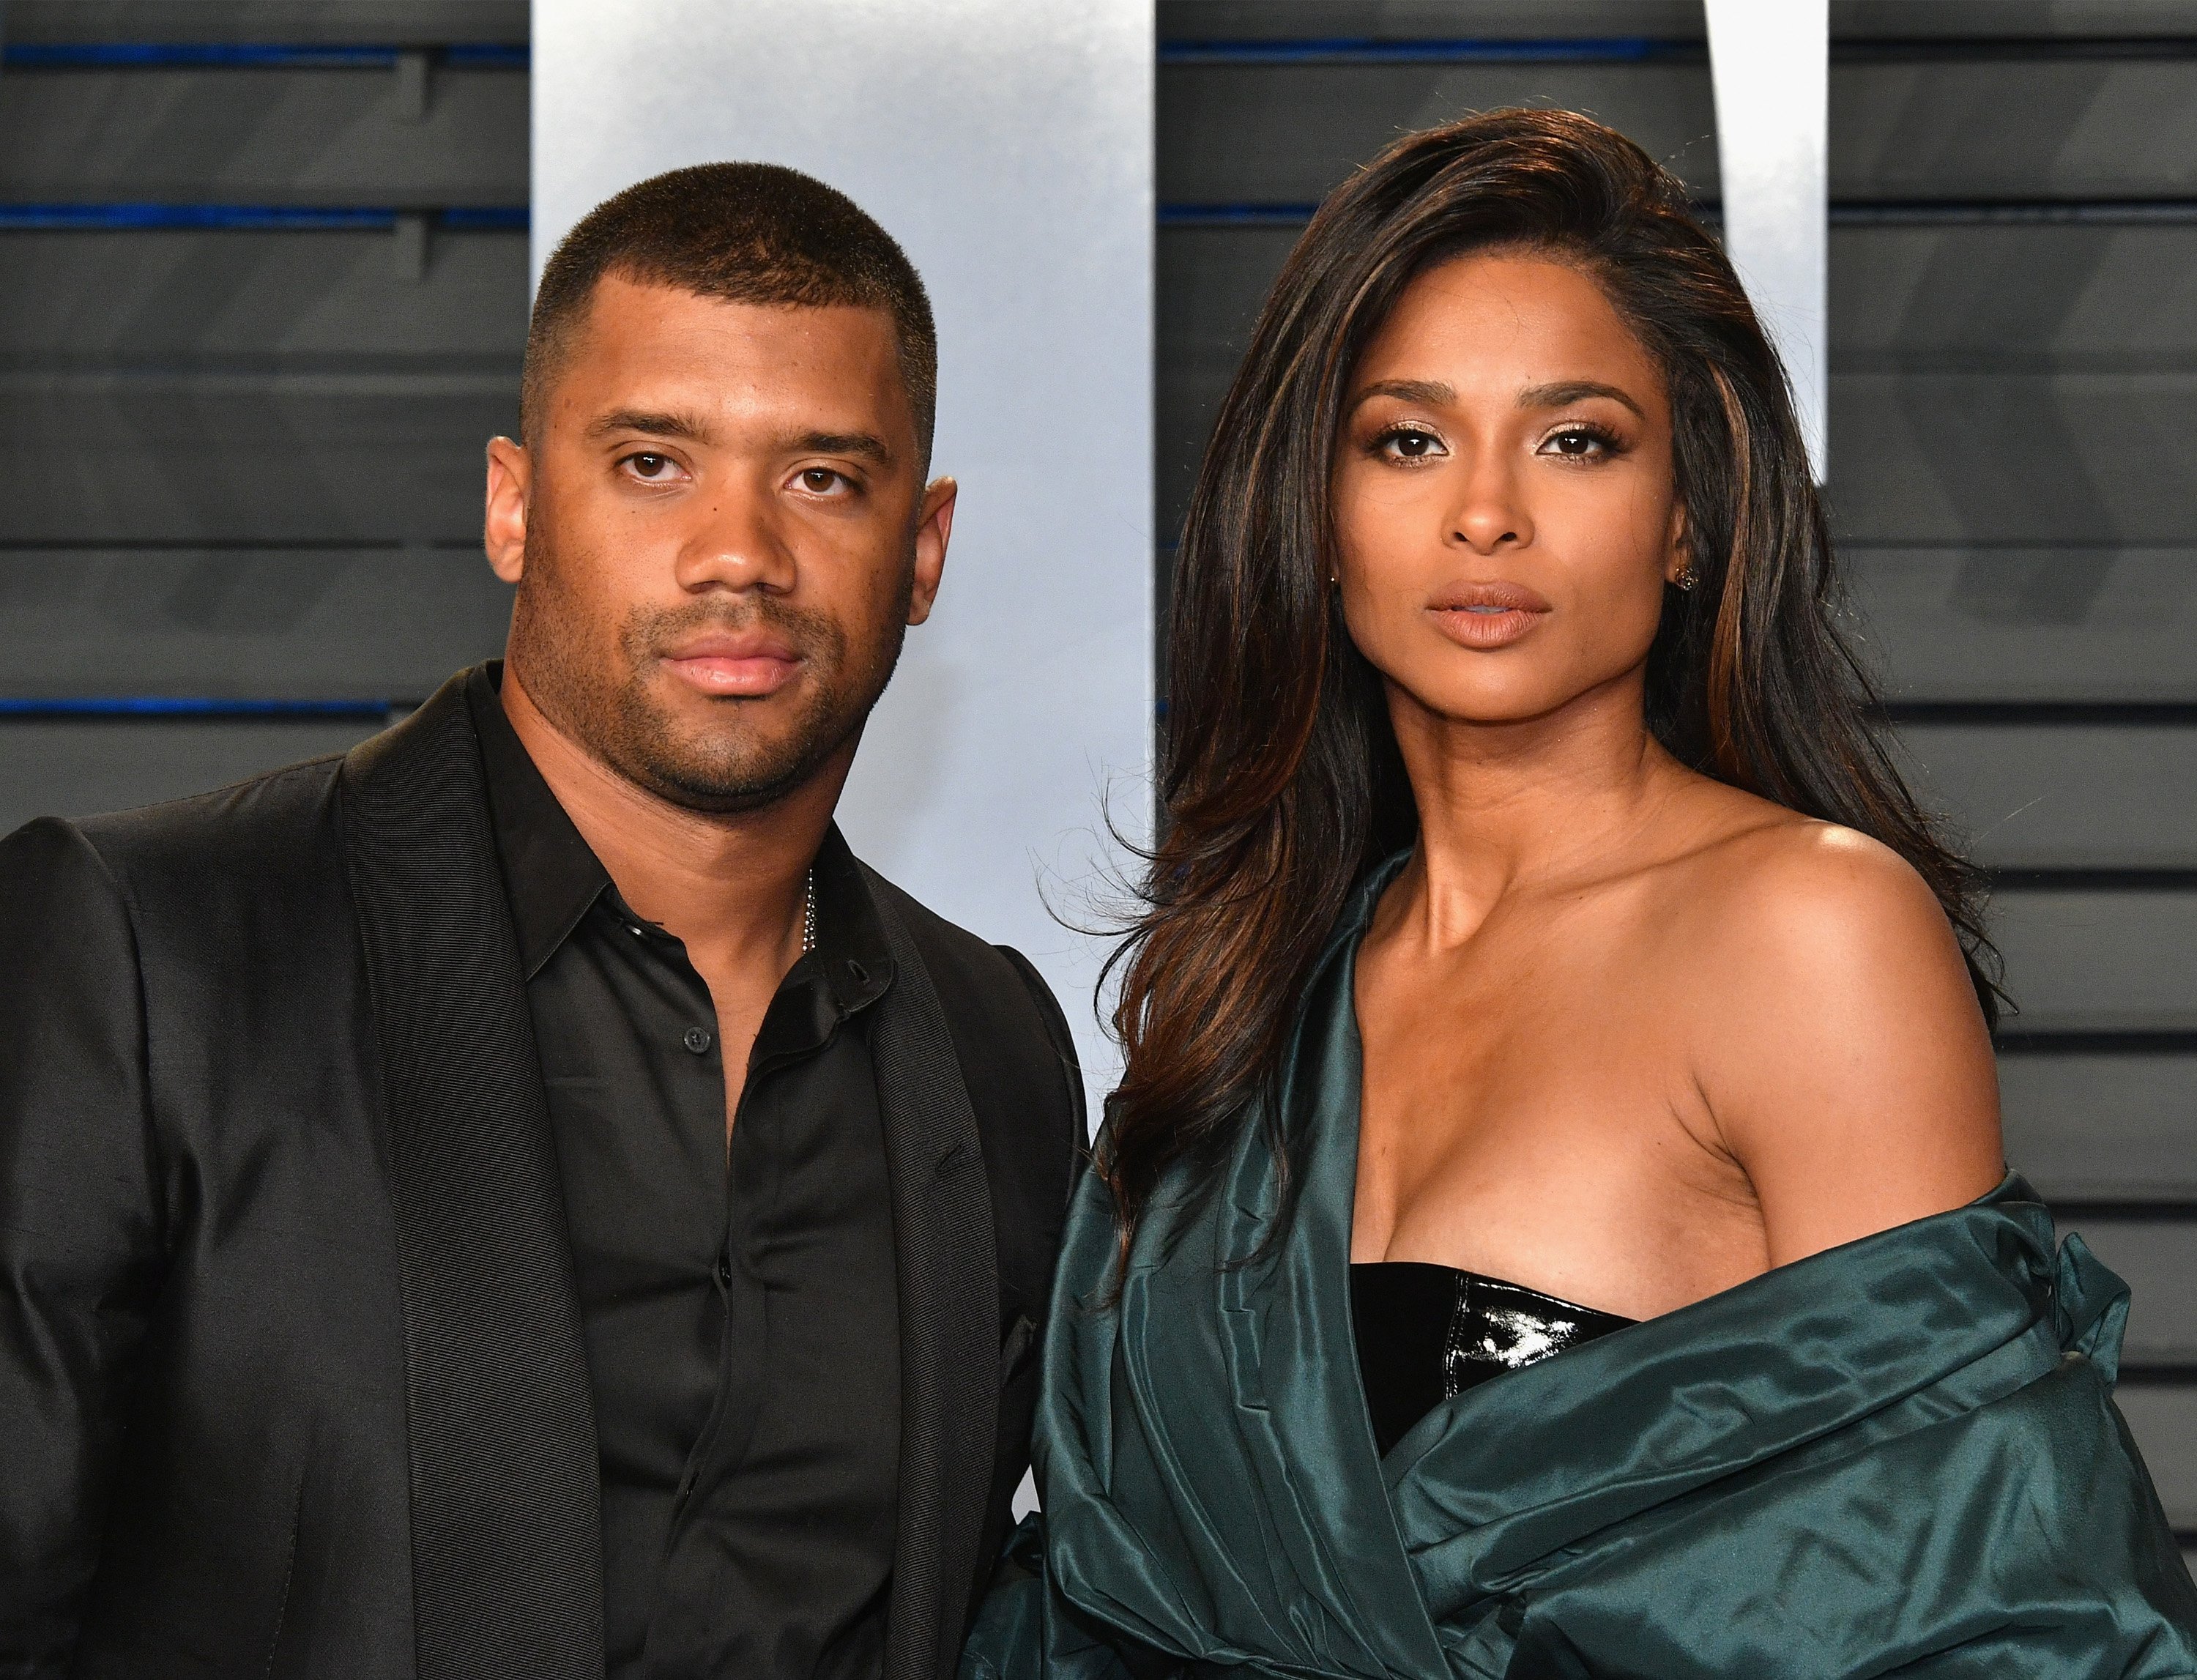  Russell Wilson and Ciara at the 2018 Vanity Fair Oscar Party on March 4, 2018 in Beverly Hills, California. | Photo: Getty Images